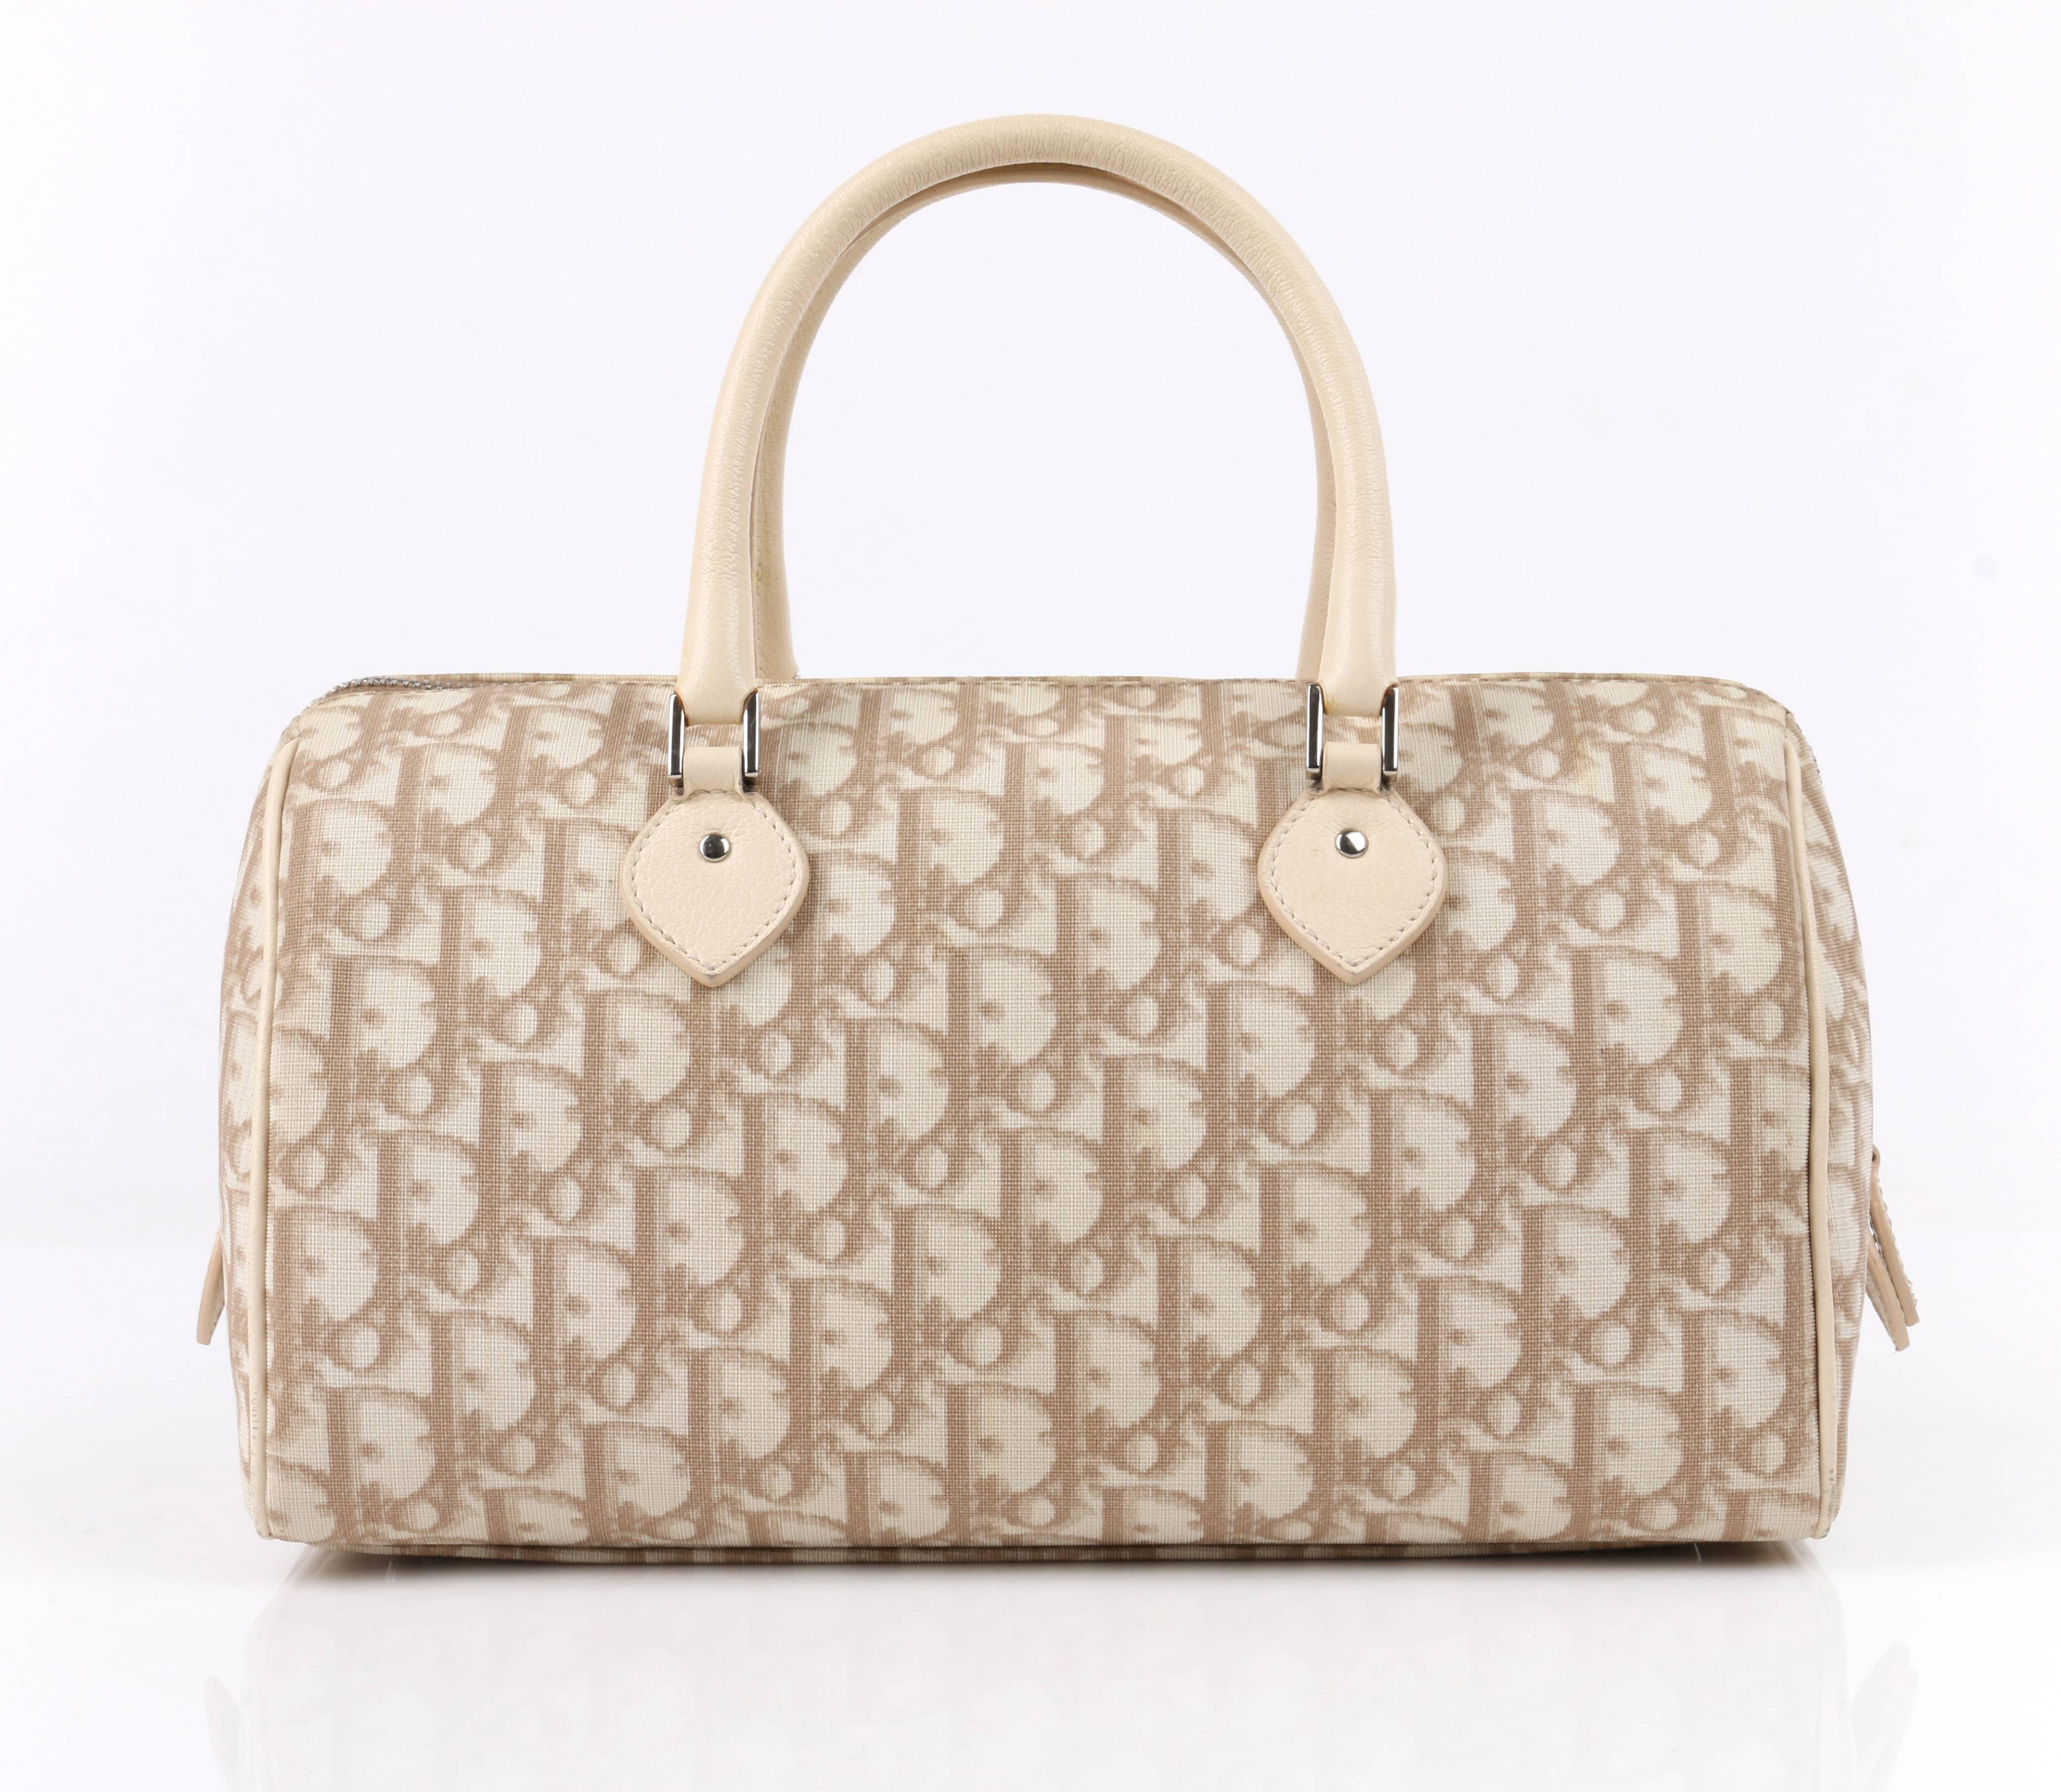 Christian Dior Spring/Summer 2005 beige Diorissimo canvas floral embroidered small boston bag. Designed by John Galliano. Signature Diorissimo monogram canvas in shades of beige with leather piping detail. Two single rolled beige leather handles.